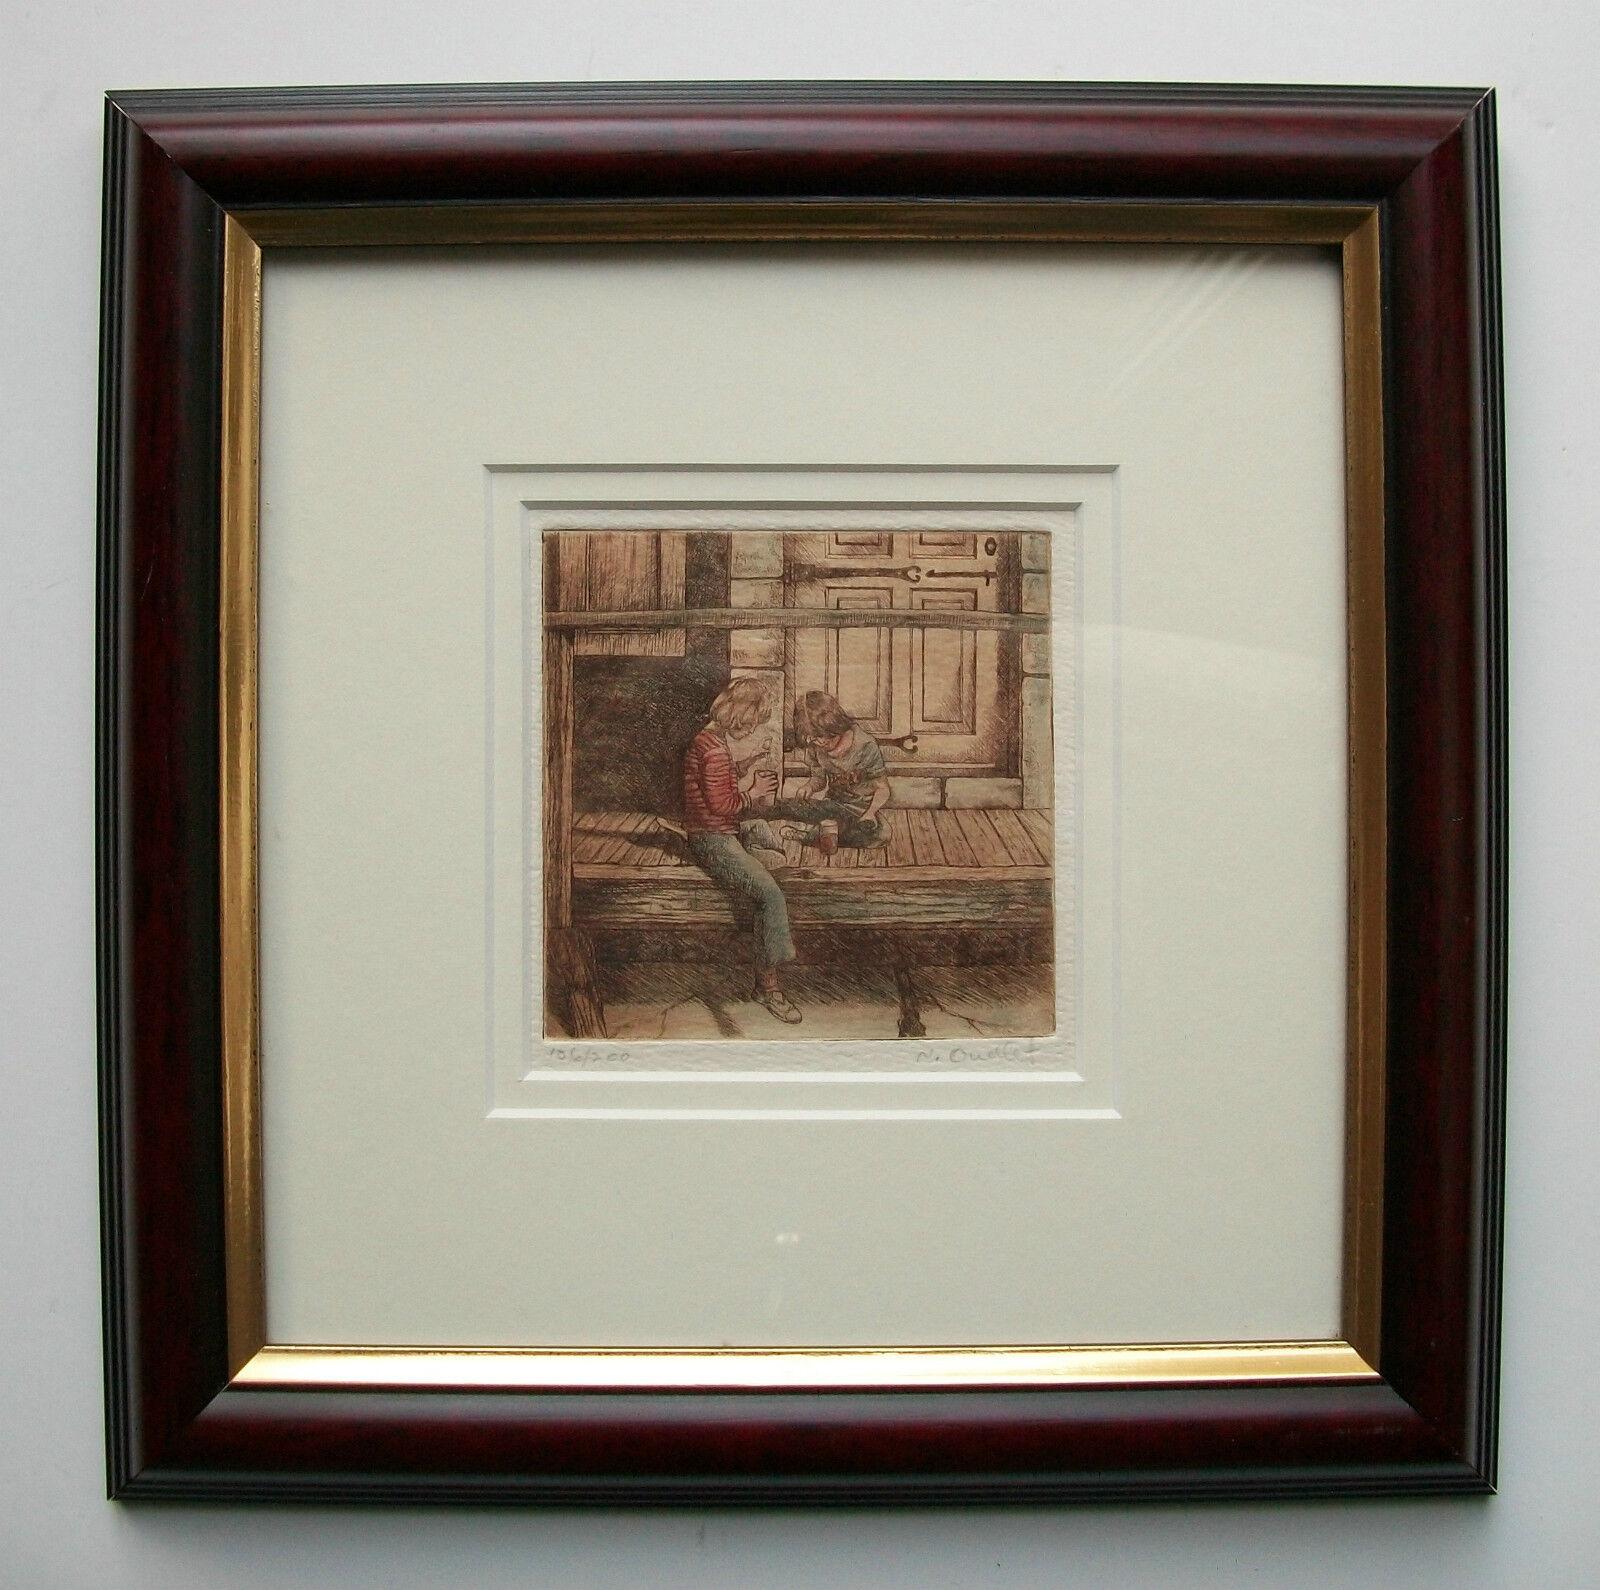 Hand-Crafted N. OUELLET - #106/200 - Vintage Framed Copperplate Engraving - Canada - C. 1978 For Sale